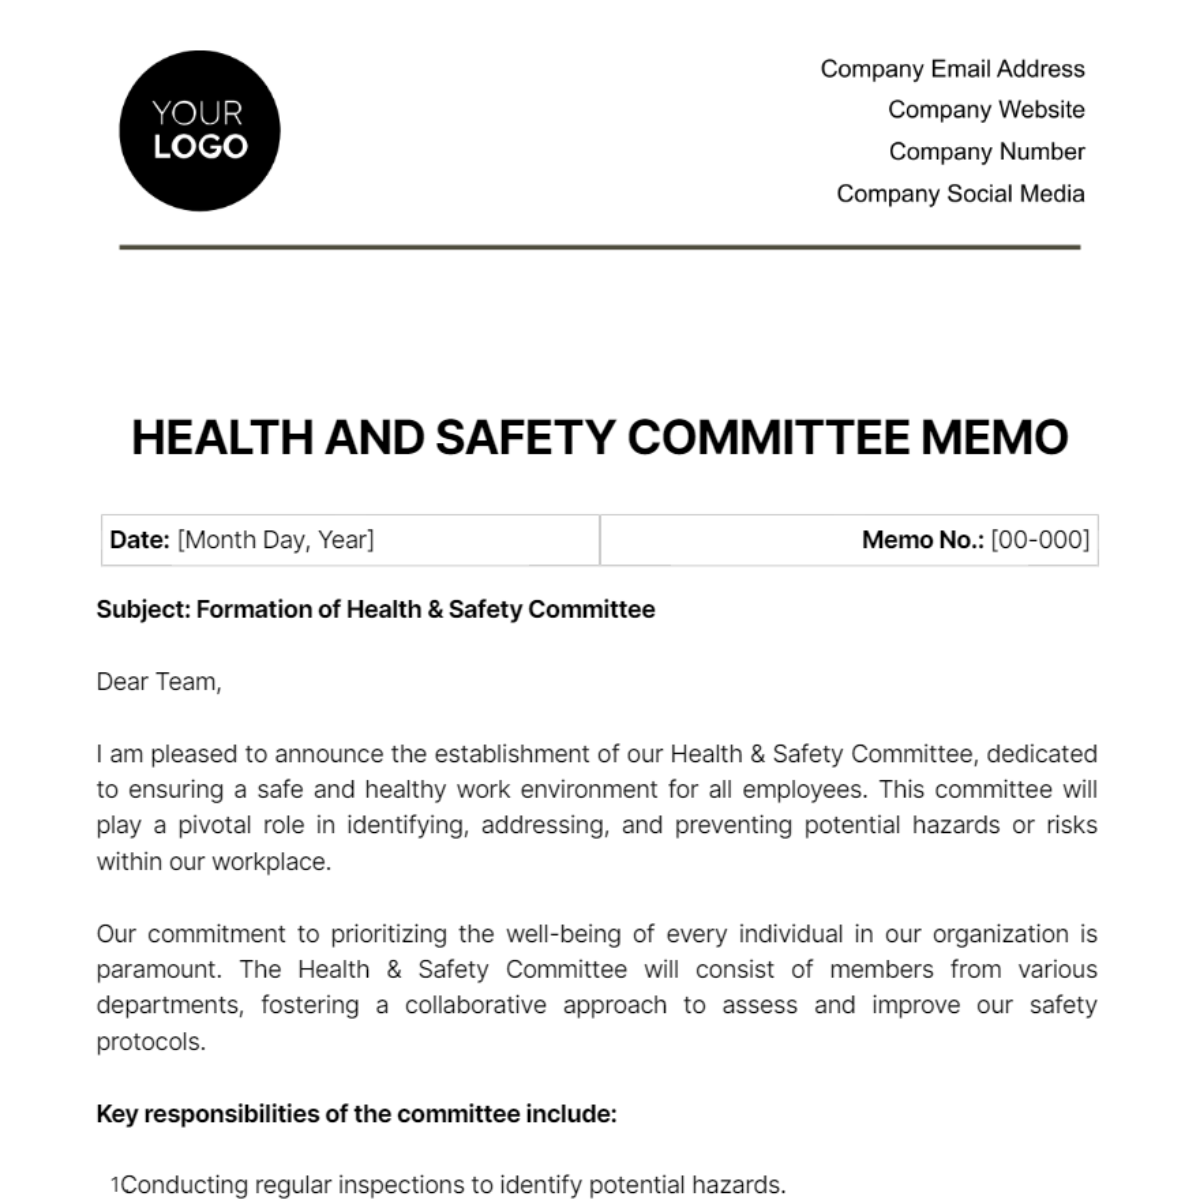 Health & Safety Committee Memo Template